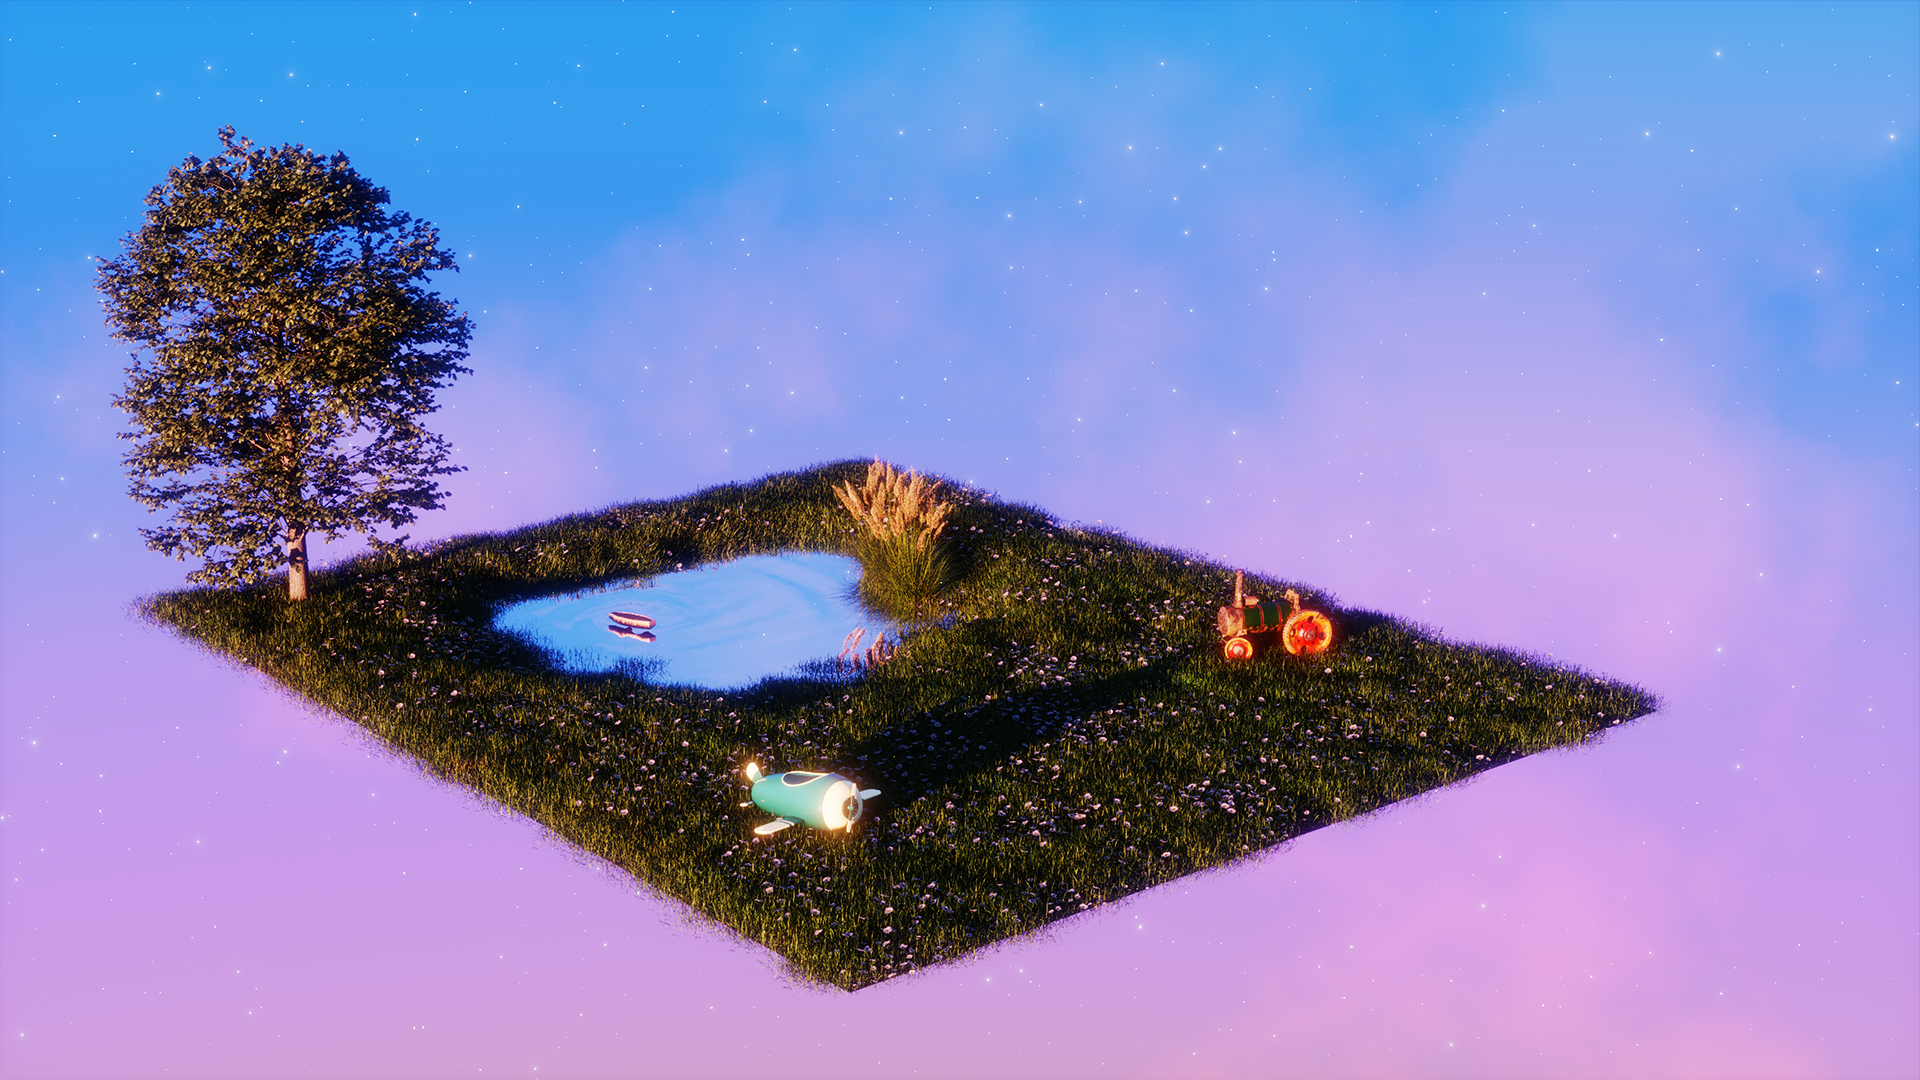 A grassy meadow with a pond, a tree, a toy plane, and a toy tractor, floating in a pink and blue morning sky.